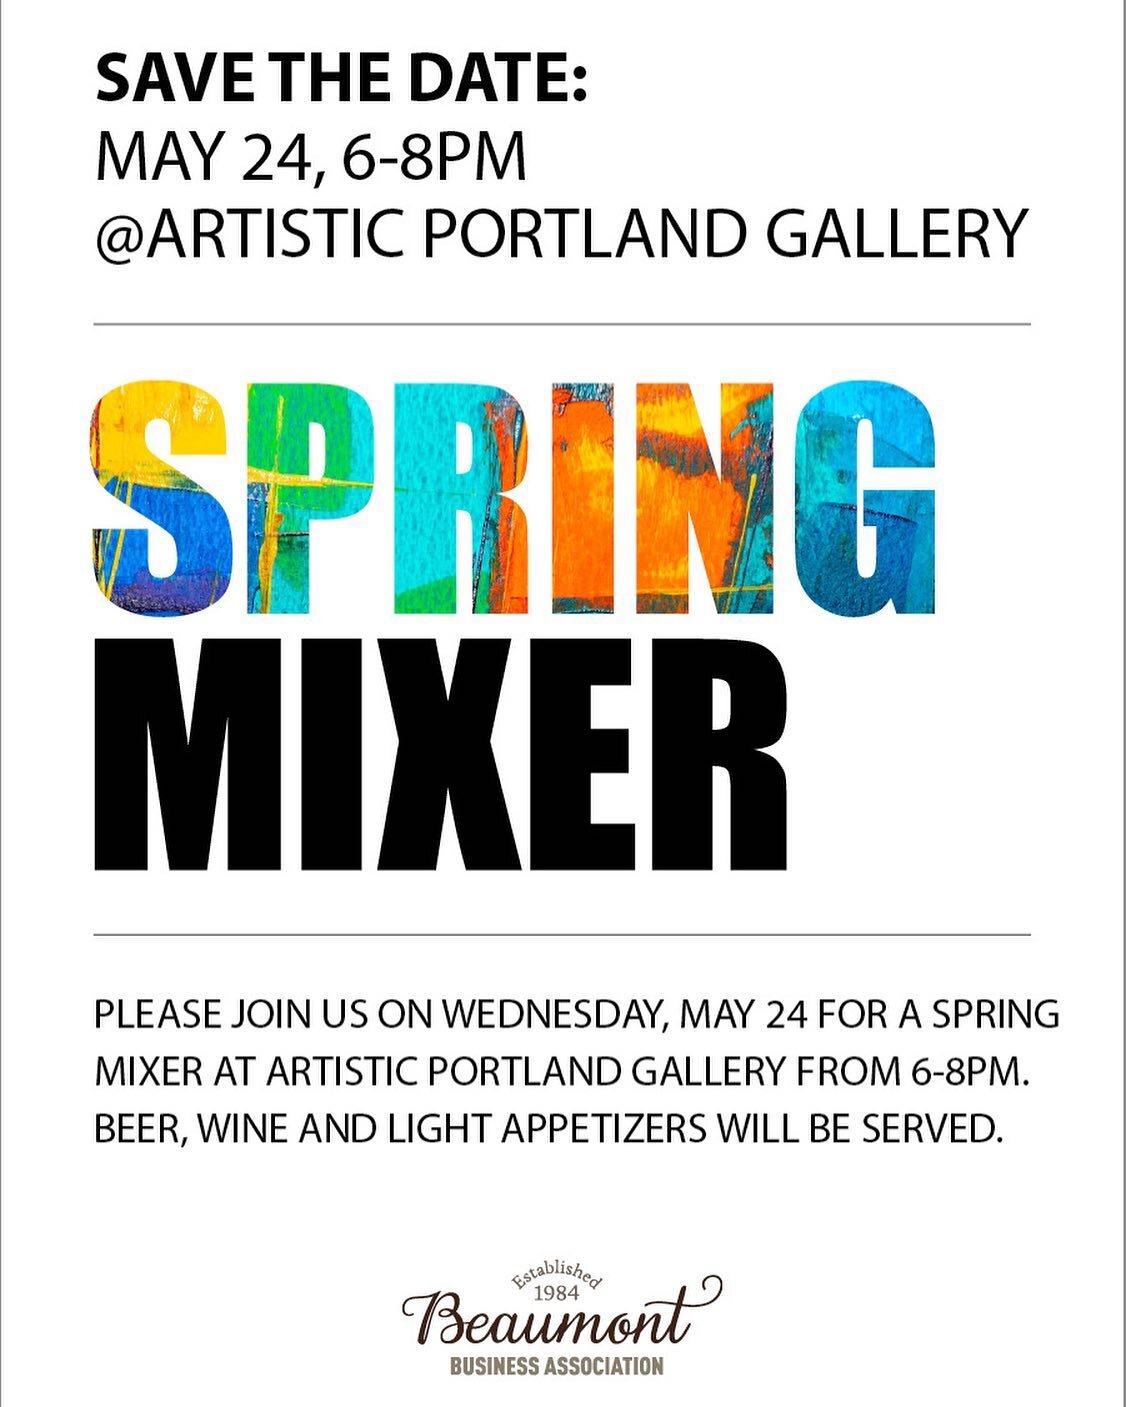 SAVE THE DATE:
BBA SPRING MIXER&nbsp;@ ARTISTIC PORTLAND GALLERY
WEDNESDAY, MAY 24, 6-8PM

&bull; Come and mingle&nbsp;
&bull; Connect with fellow businesses&nbsp;
&bull; Meet the BBA Board&nbsp;
&bull; Have a drink and some light appetizers
&bull; D